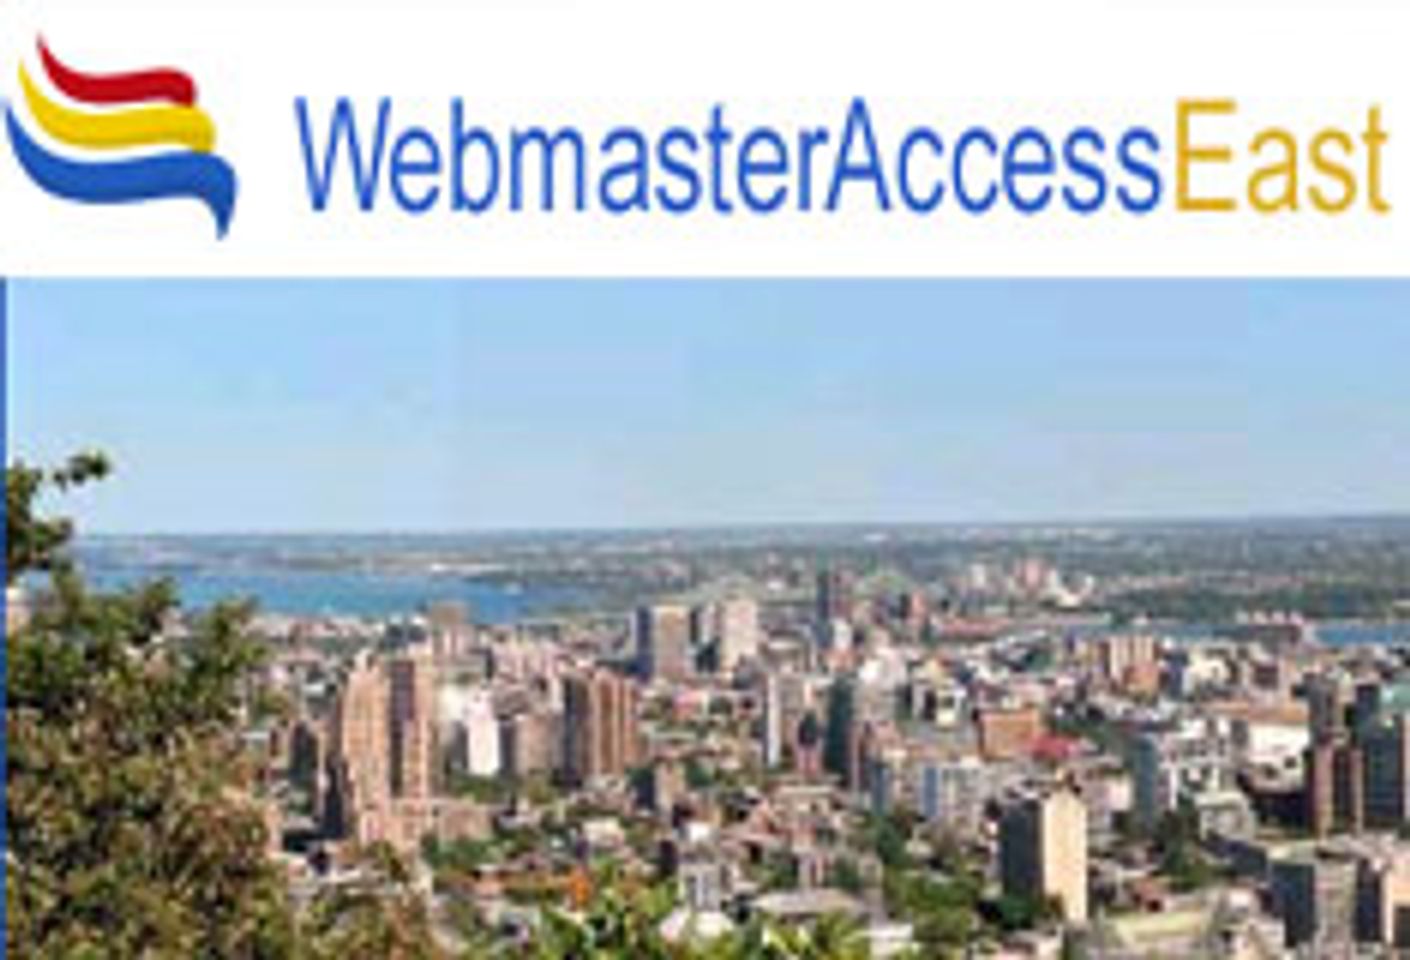 Webmaster Access East Shaping Up Quite Nicely, Thank You